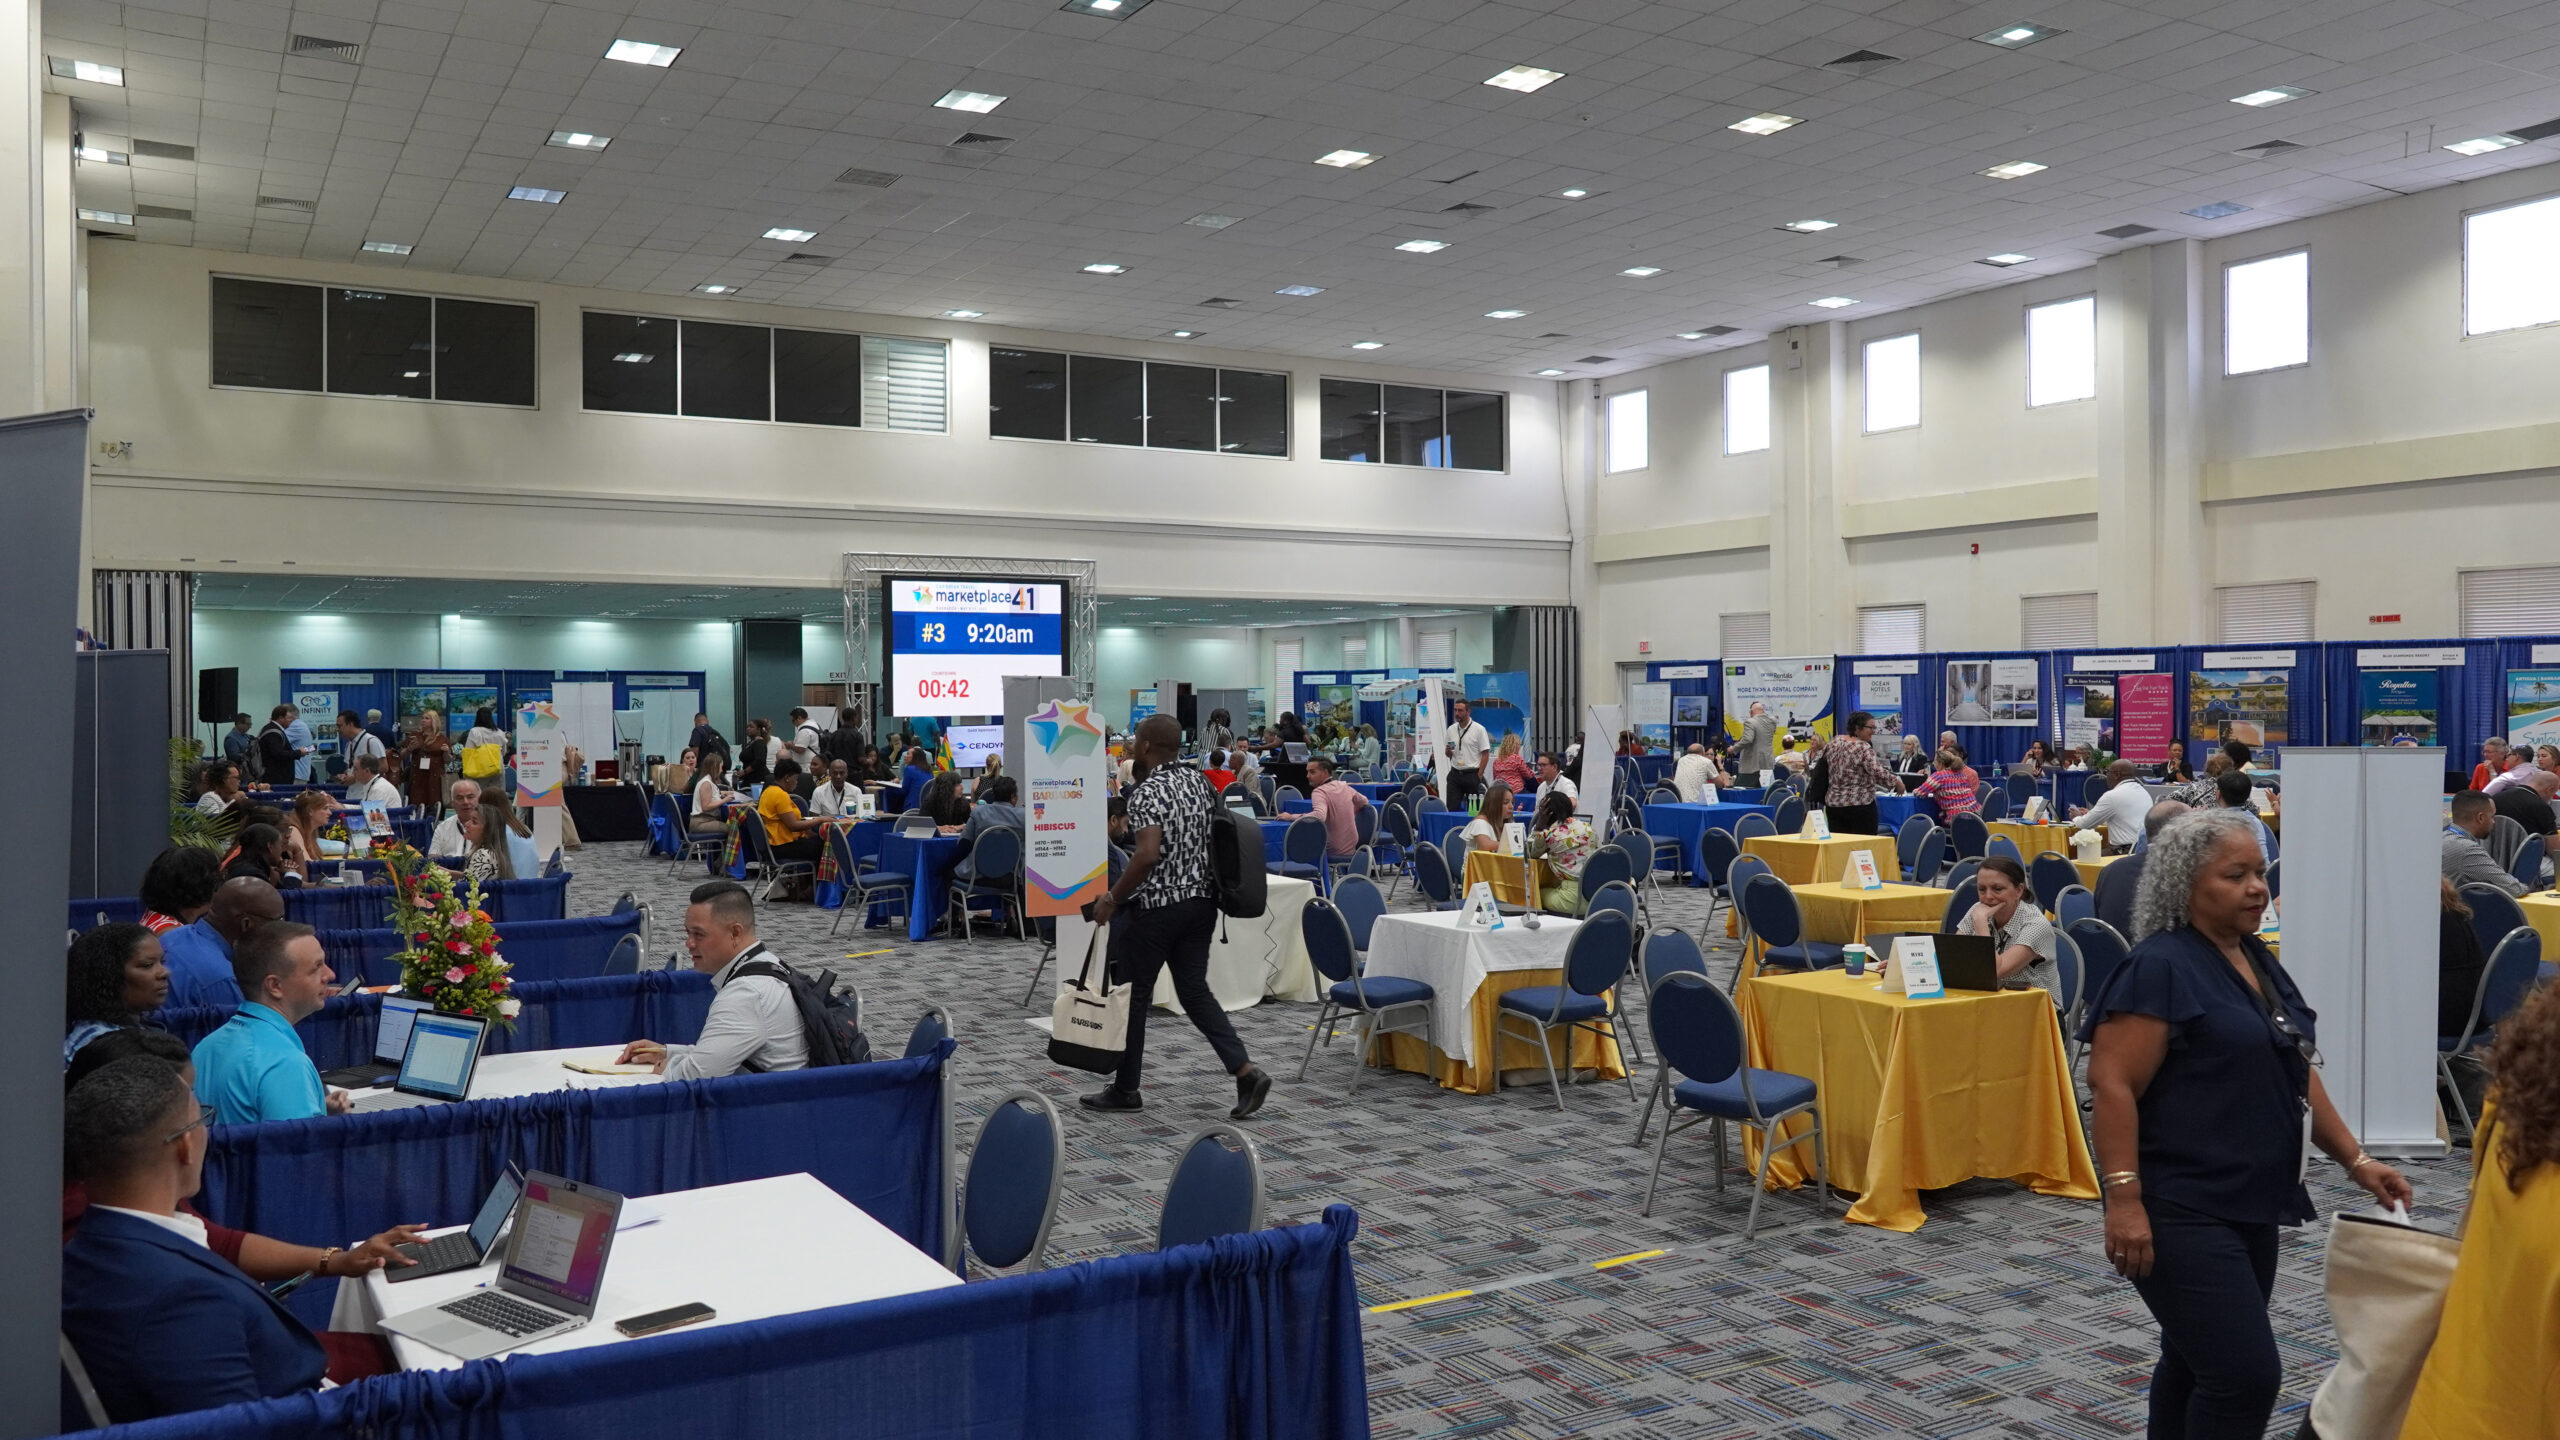 Exhibition and meeting floor at The Caribbean Travel Marketplace in Barbados.